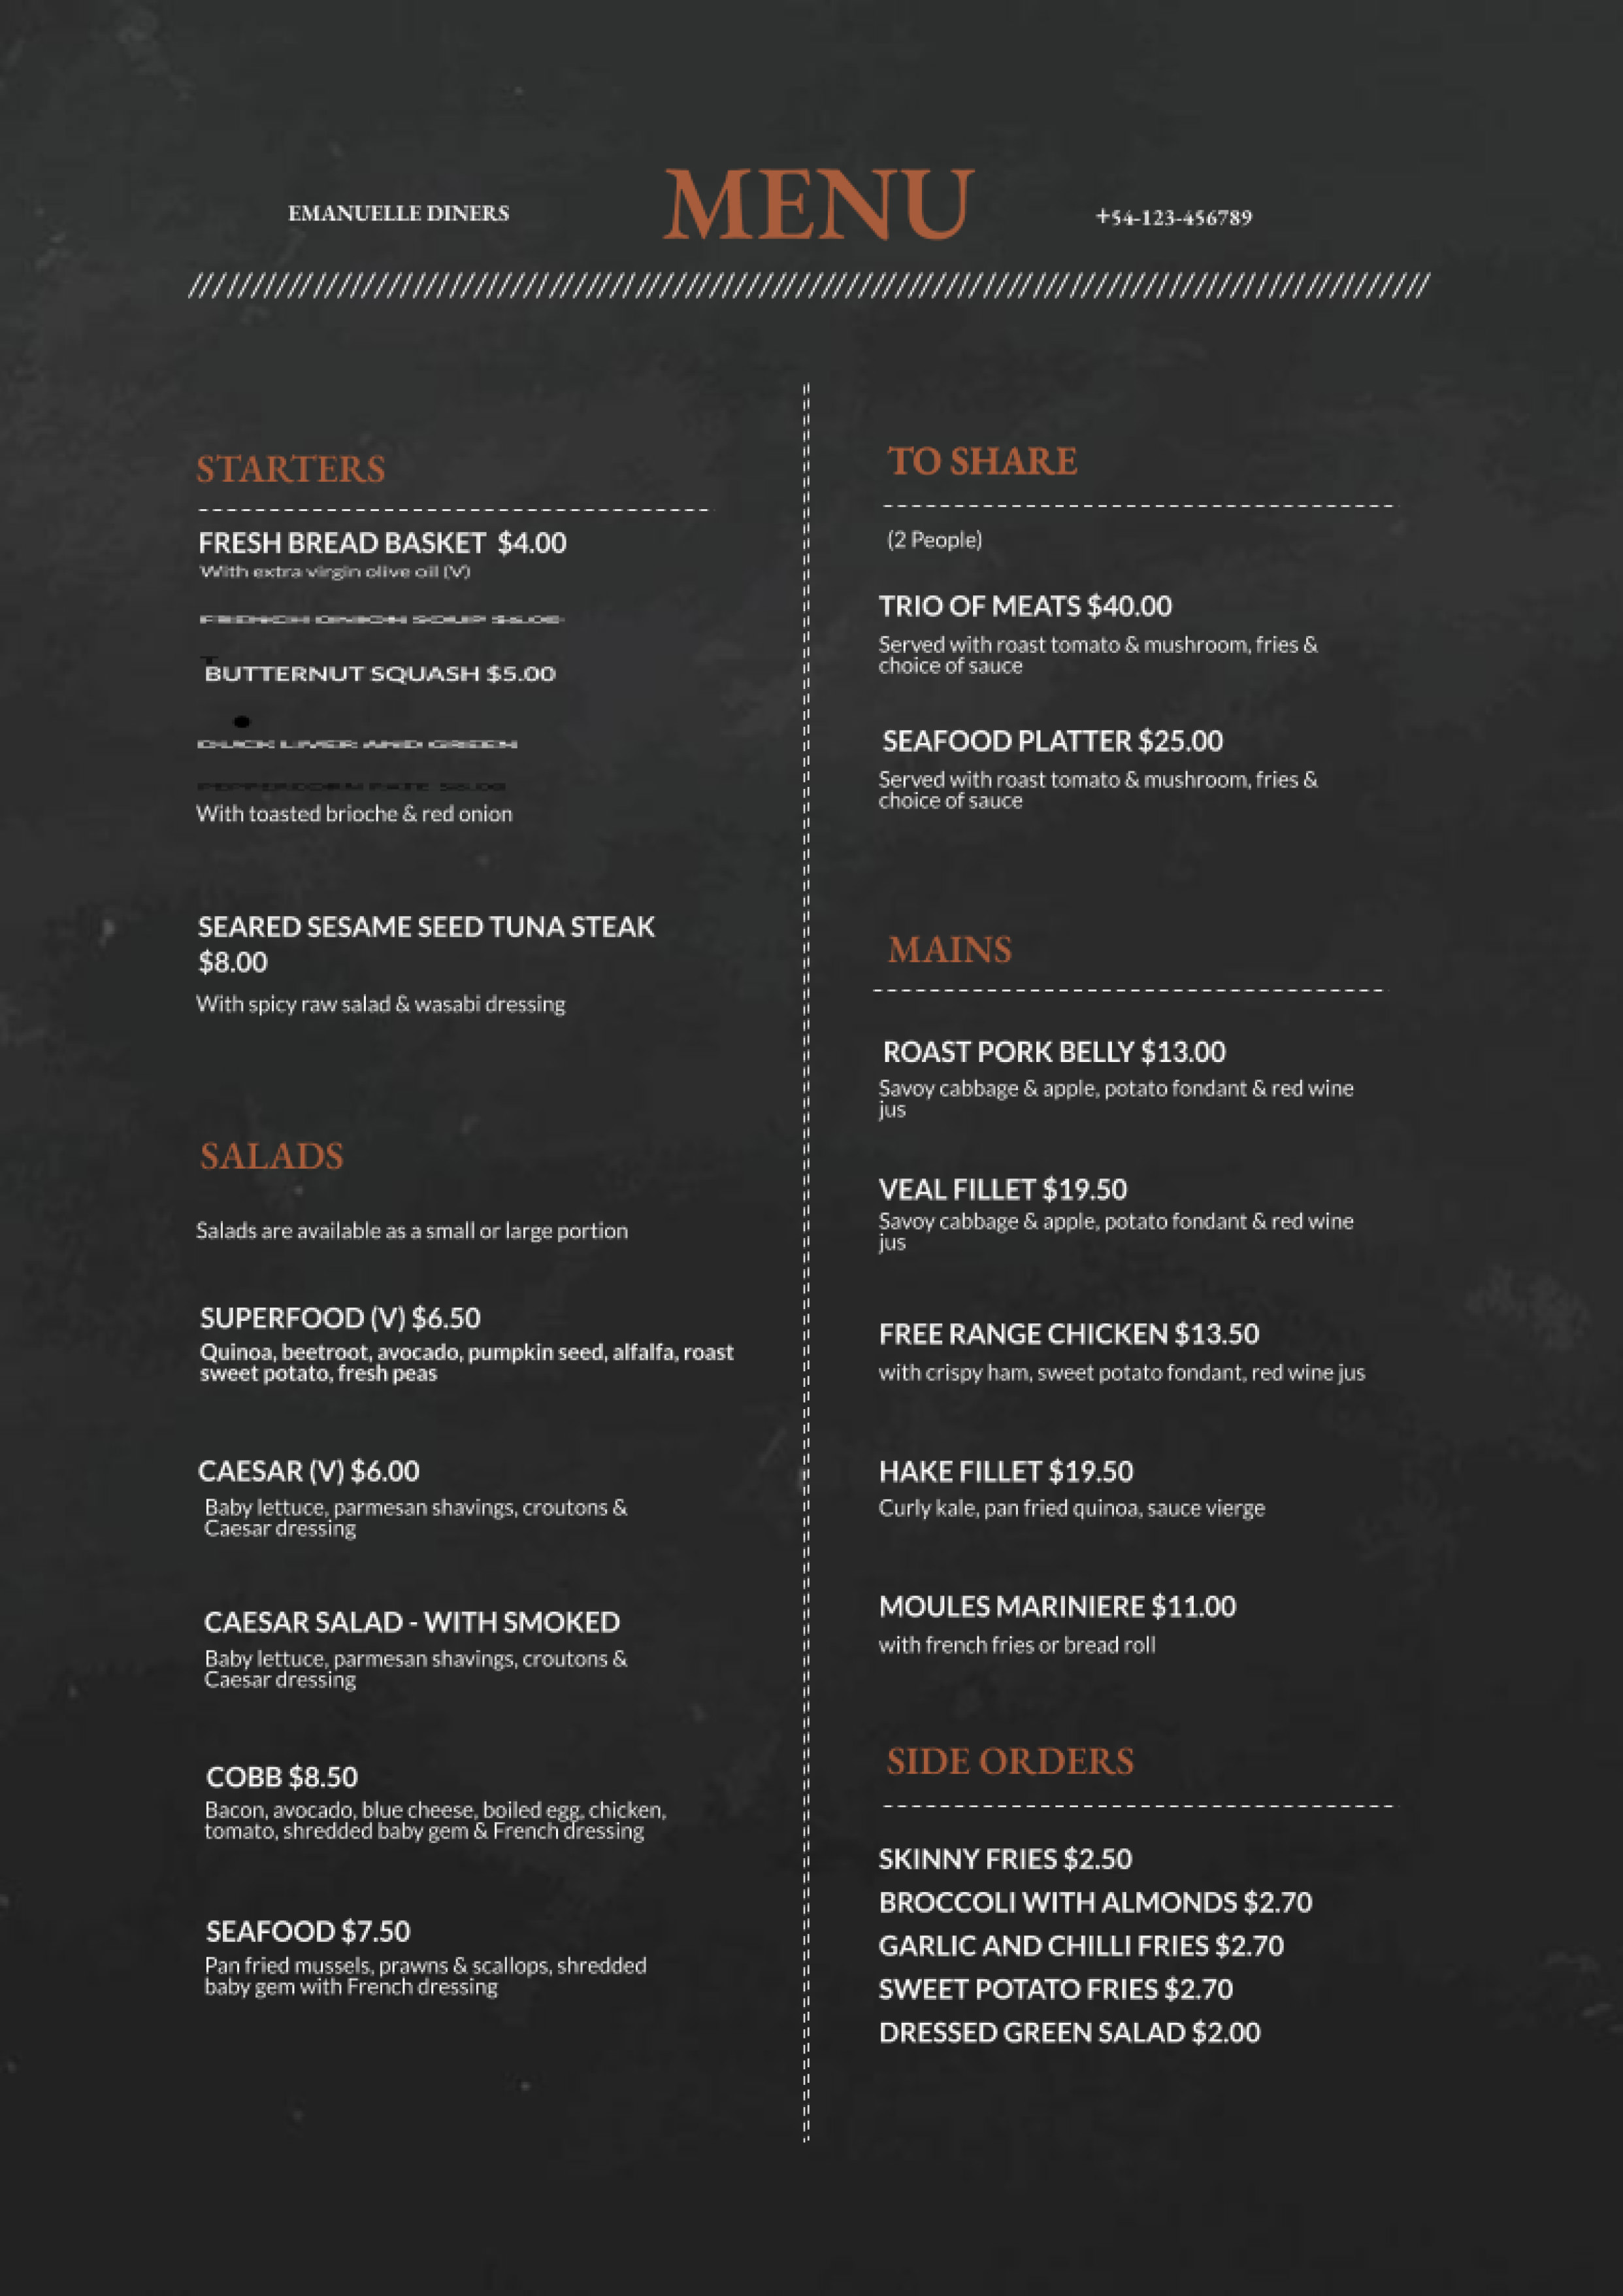 23 Free Simple Menu Templates For Restaurants, Cafes, And Parties With Word Document Menu Template